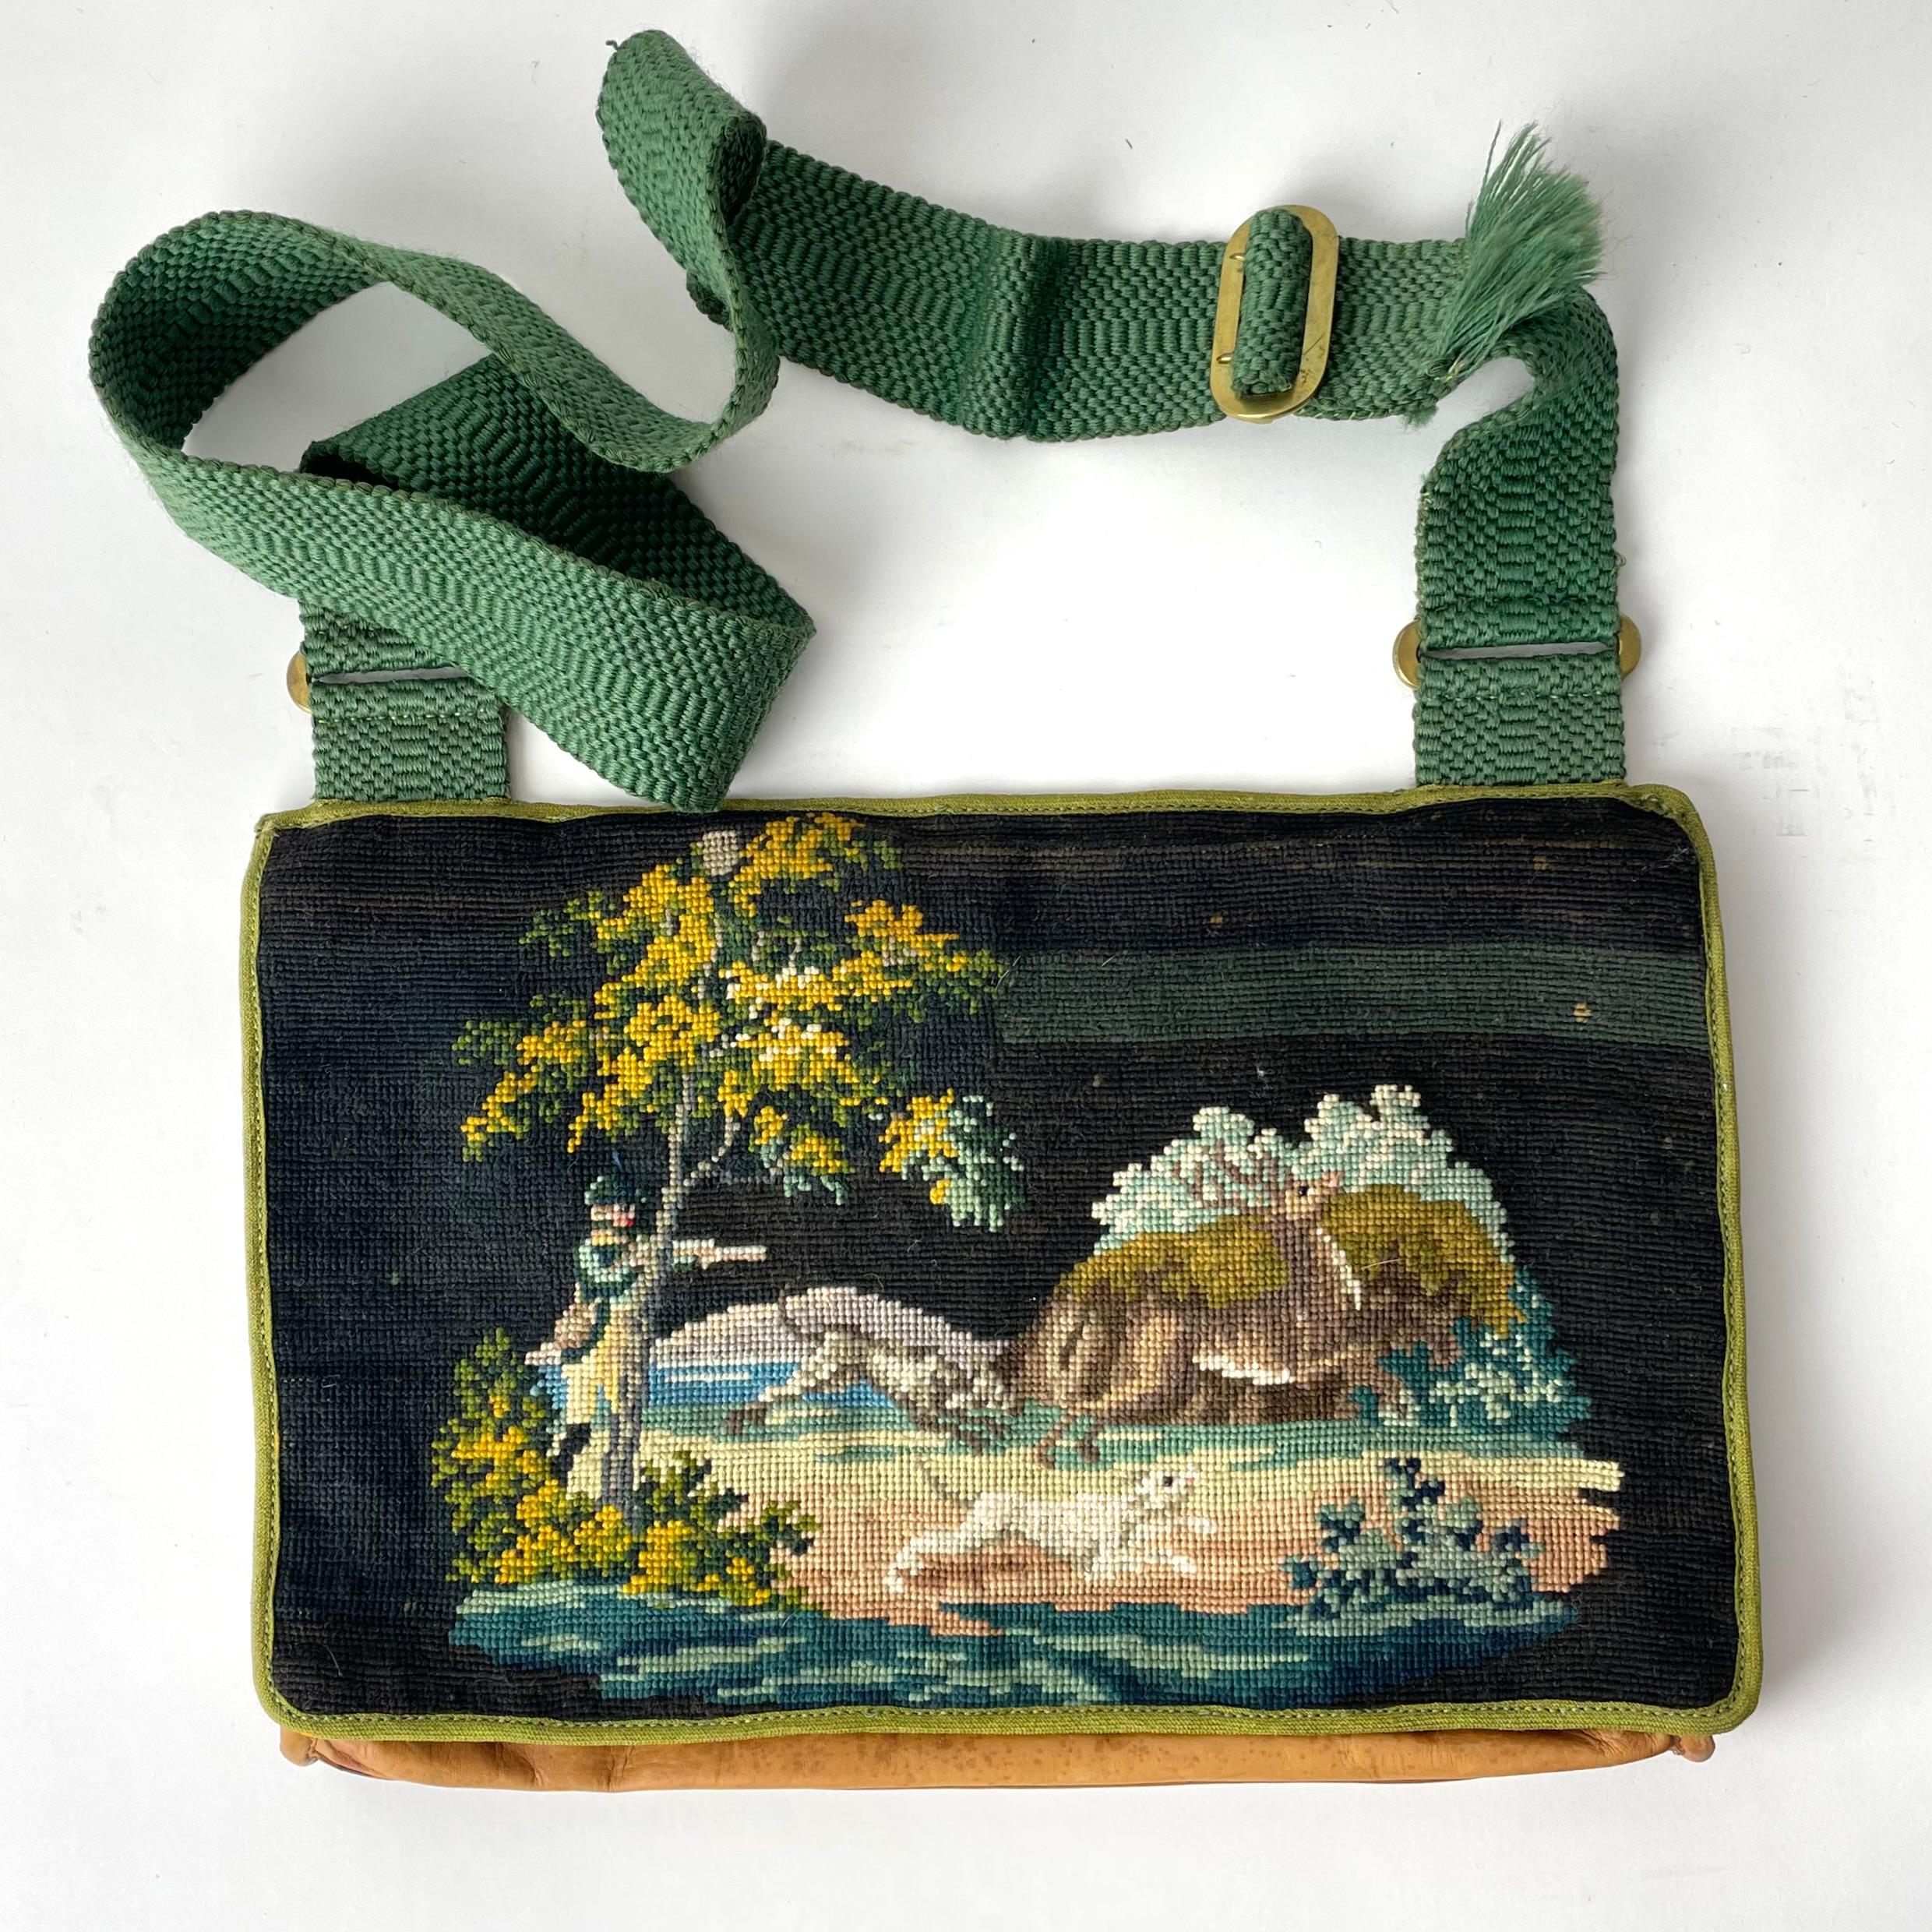 A beautiful Hunting Bag in leather with Petit Point decor from a hunting scene. Made during the 19th Century and inside with pockets for cartridges.

Wear consistent with age and use 